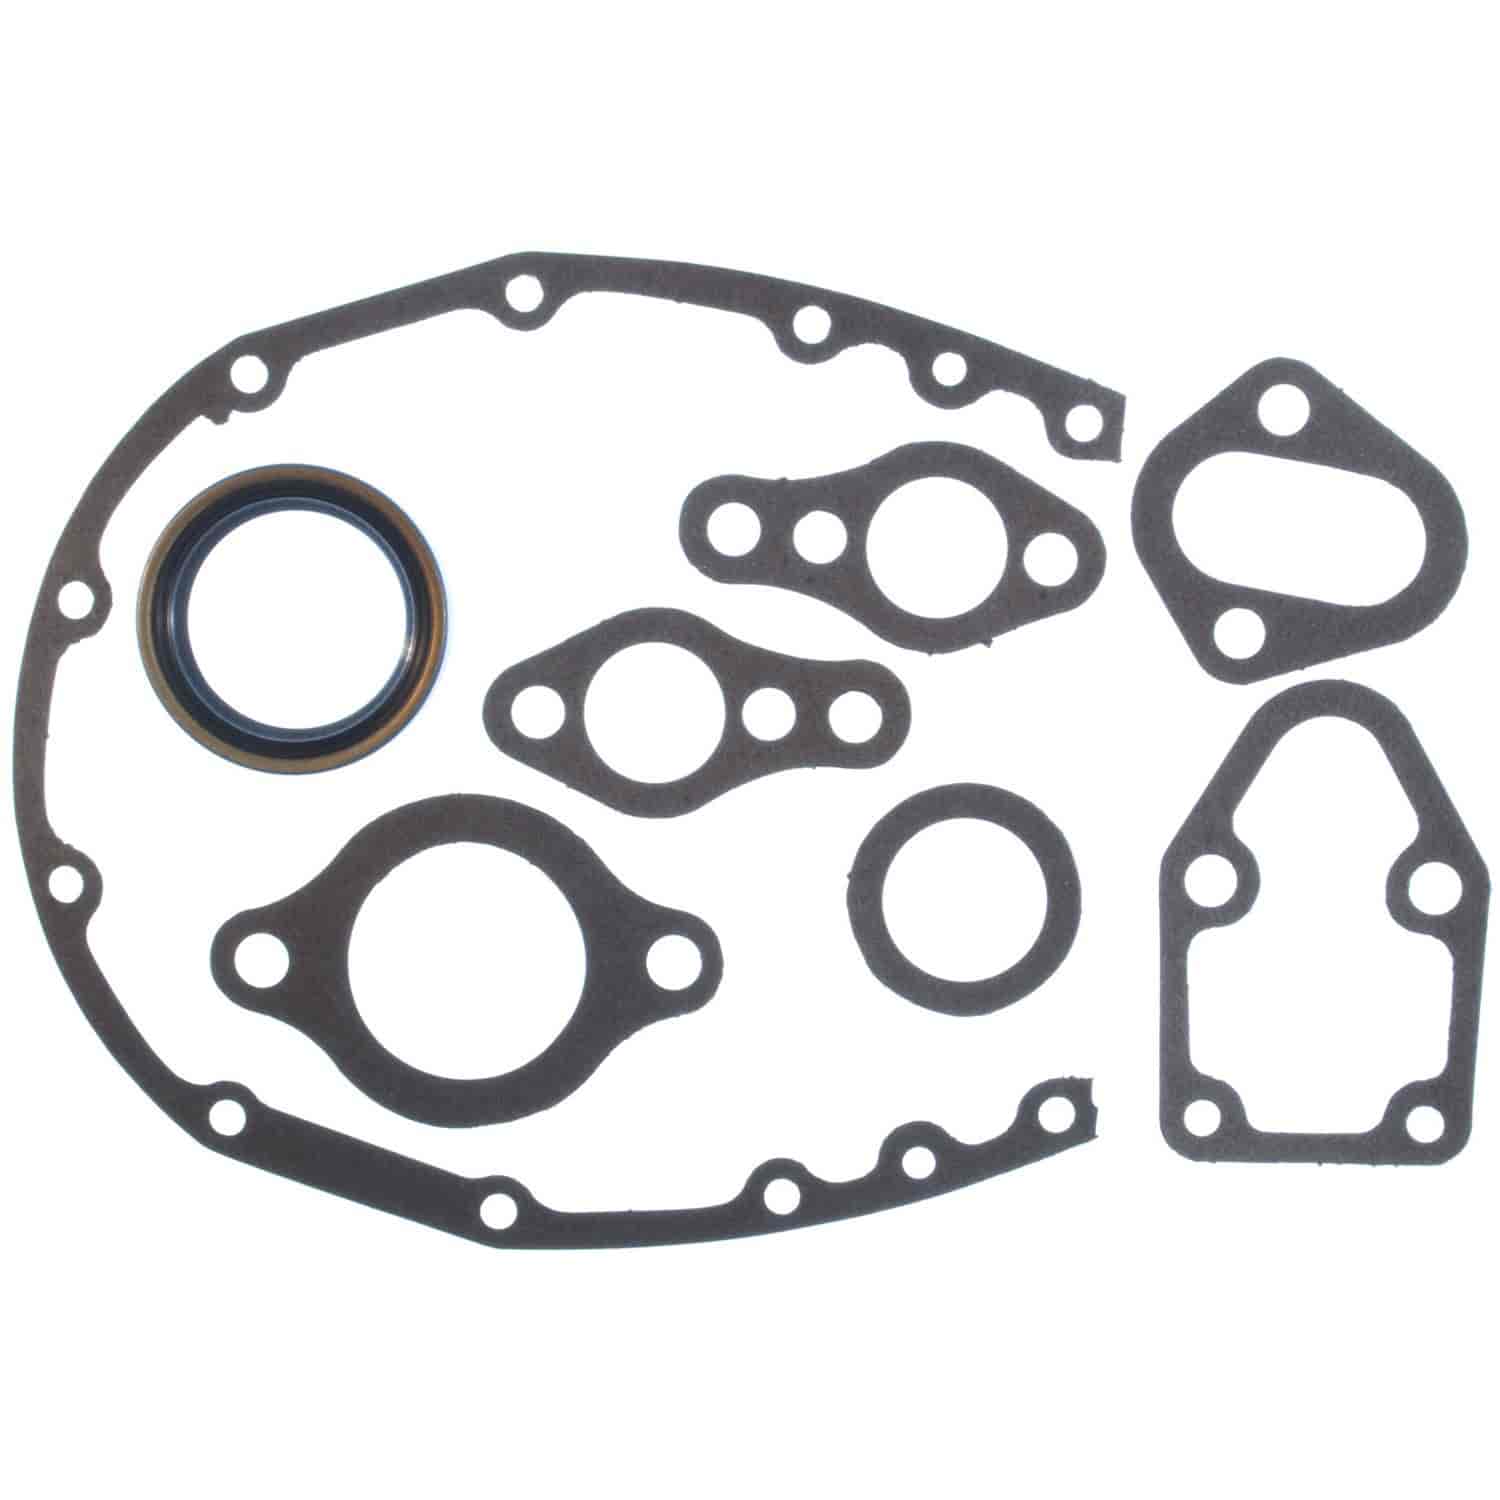 Timing Cover Gasket Set 1986-1995 Small Block Chevy